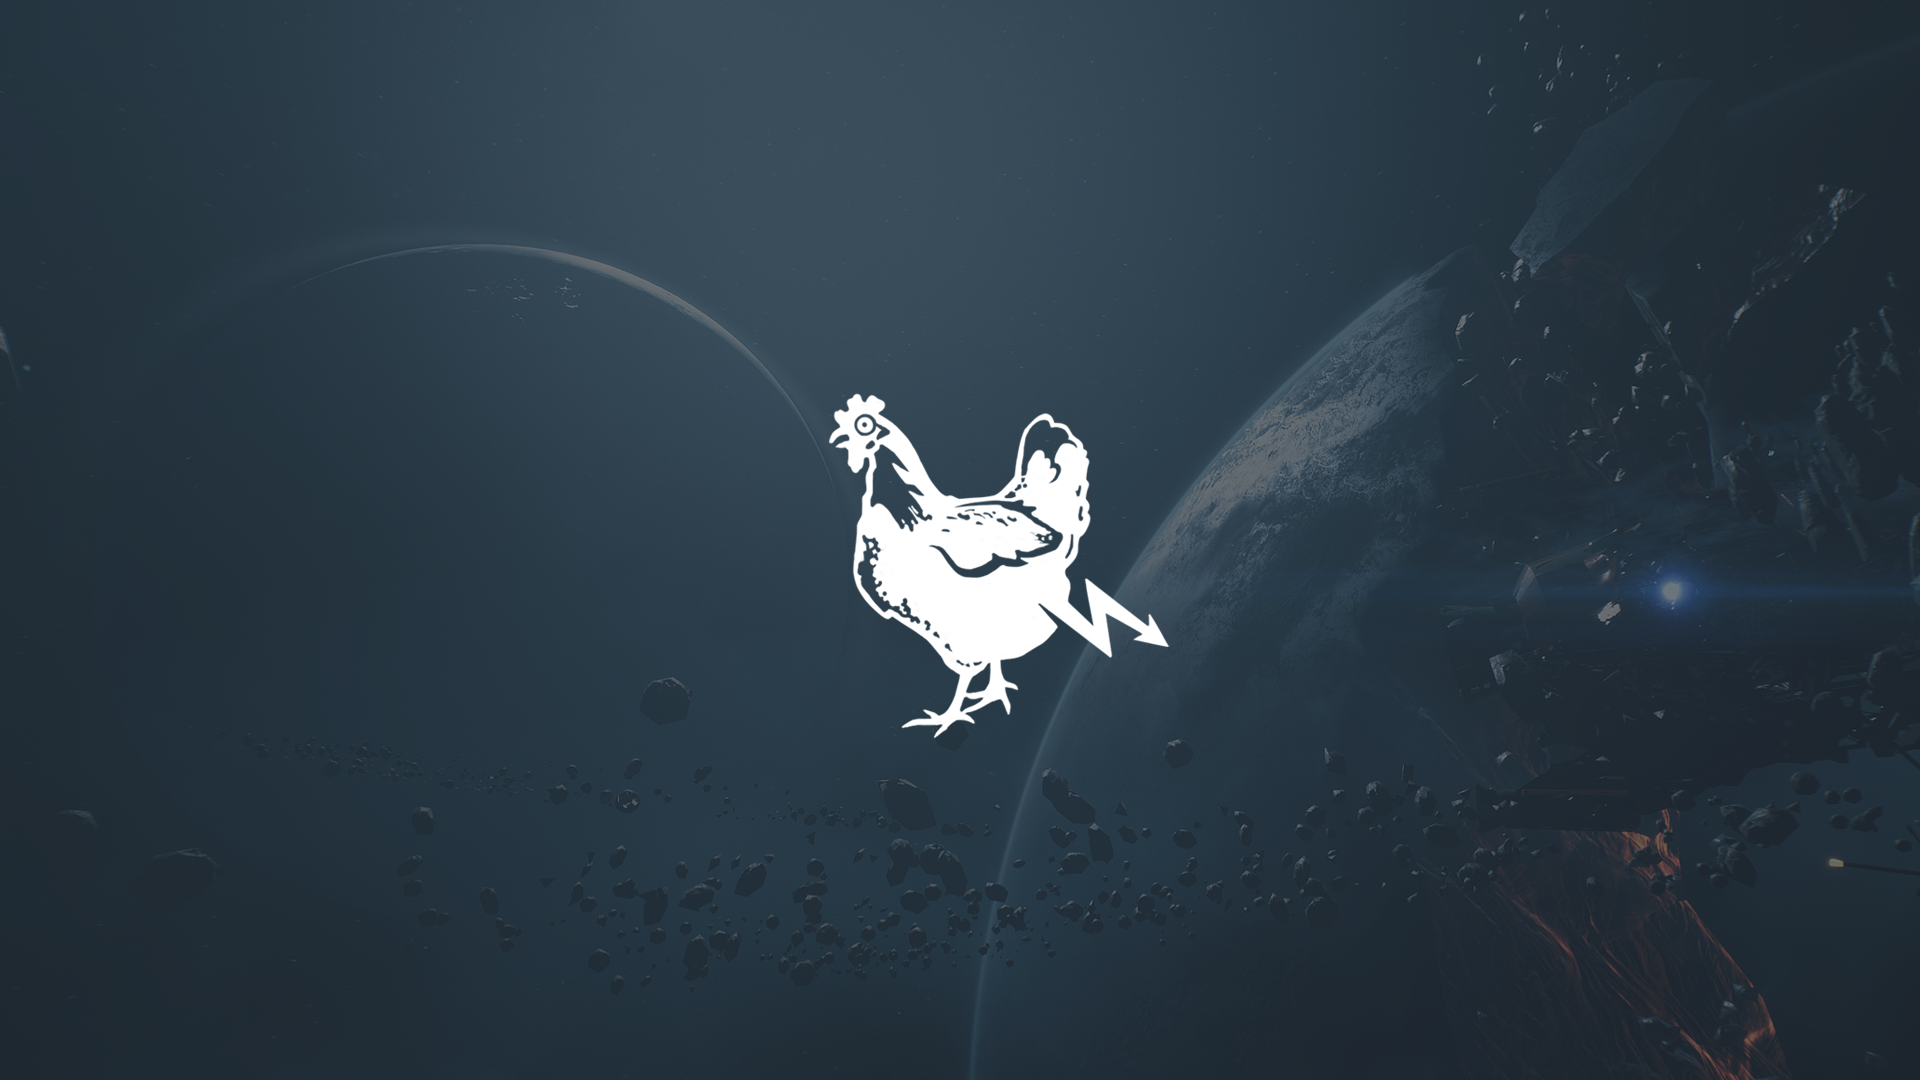 Icon for Chicken dielectric